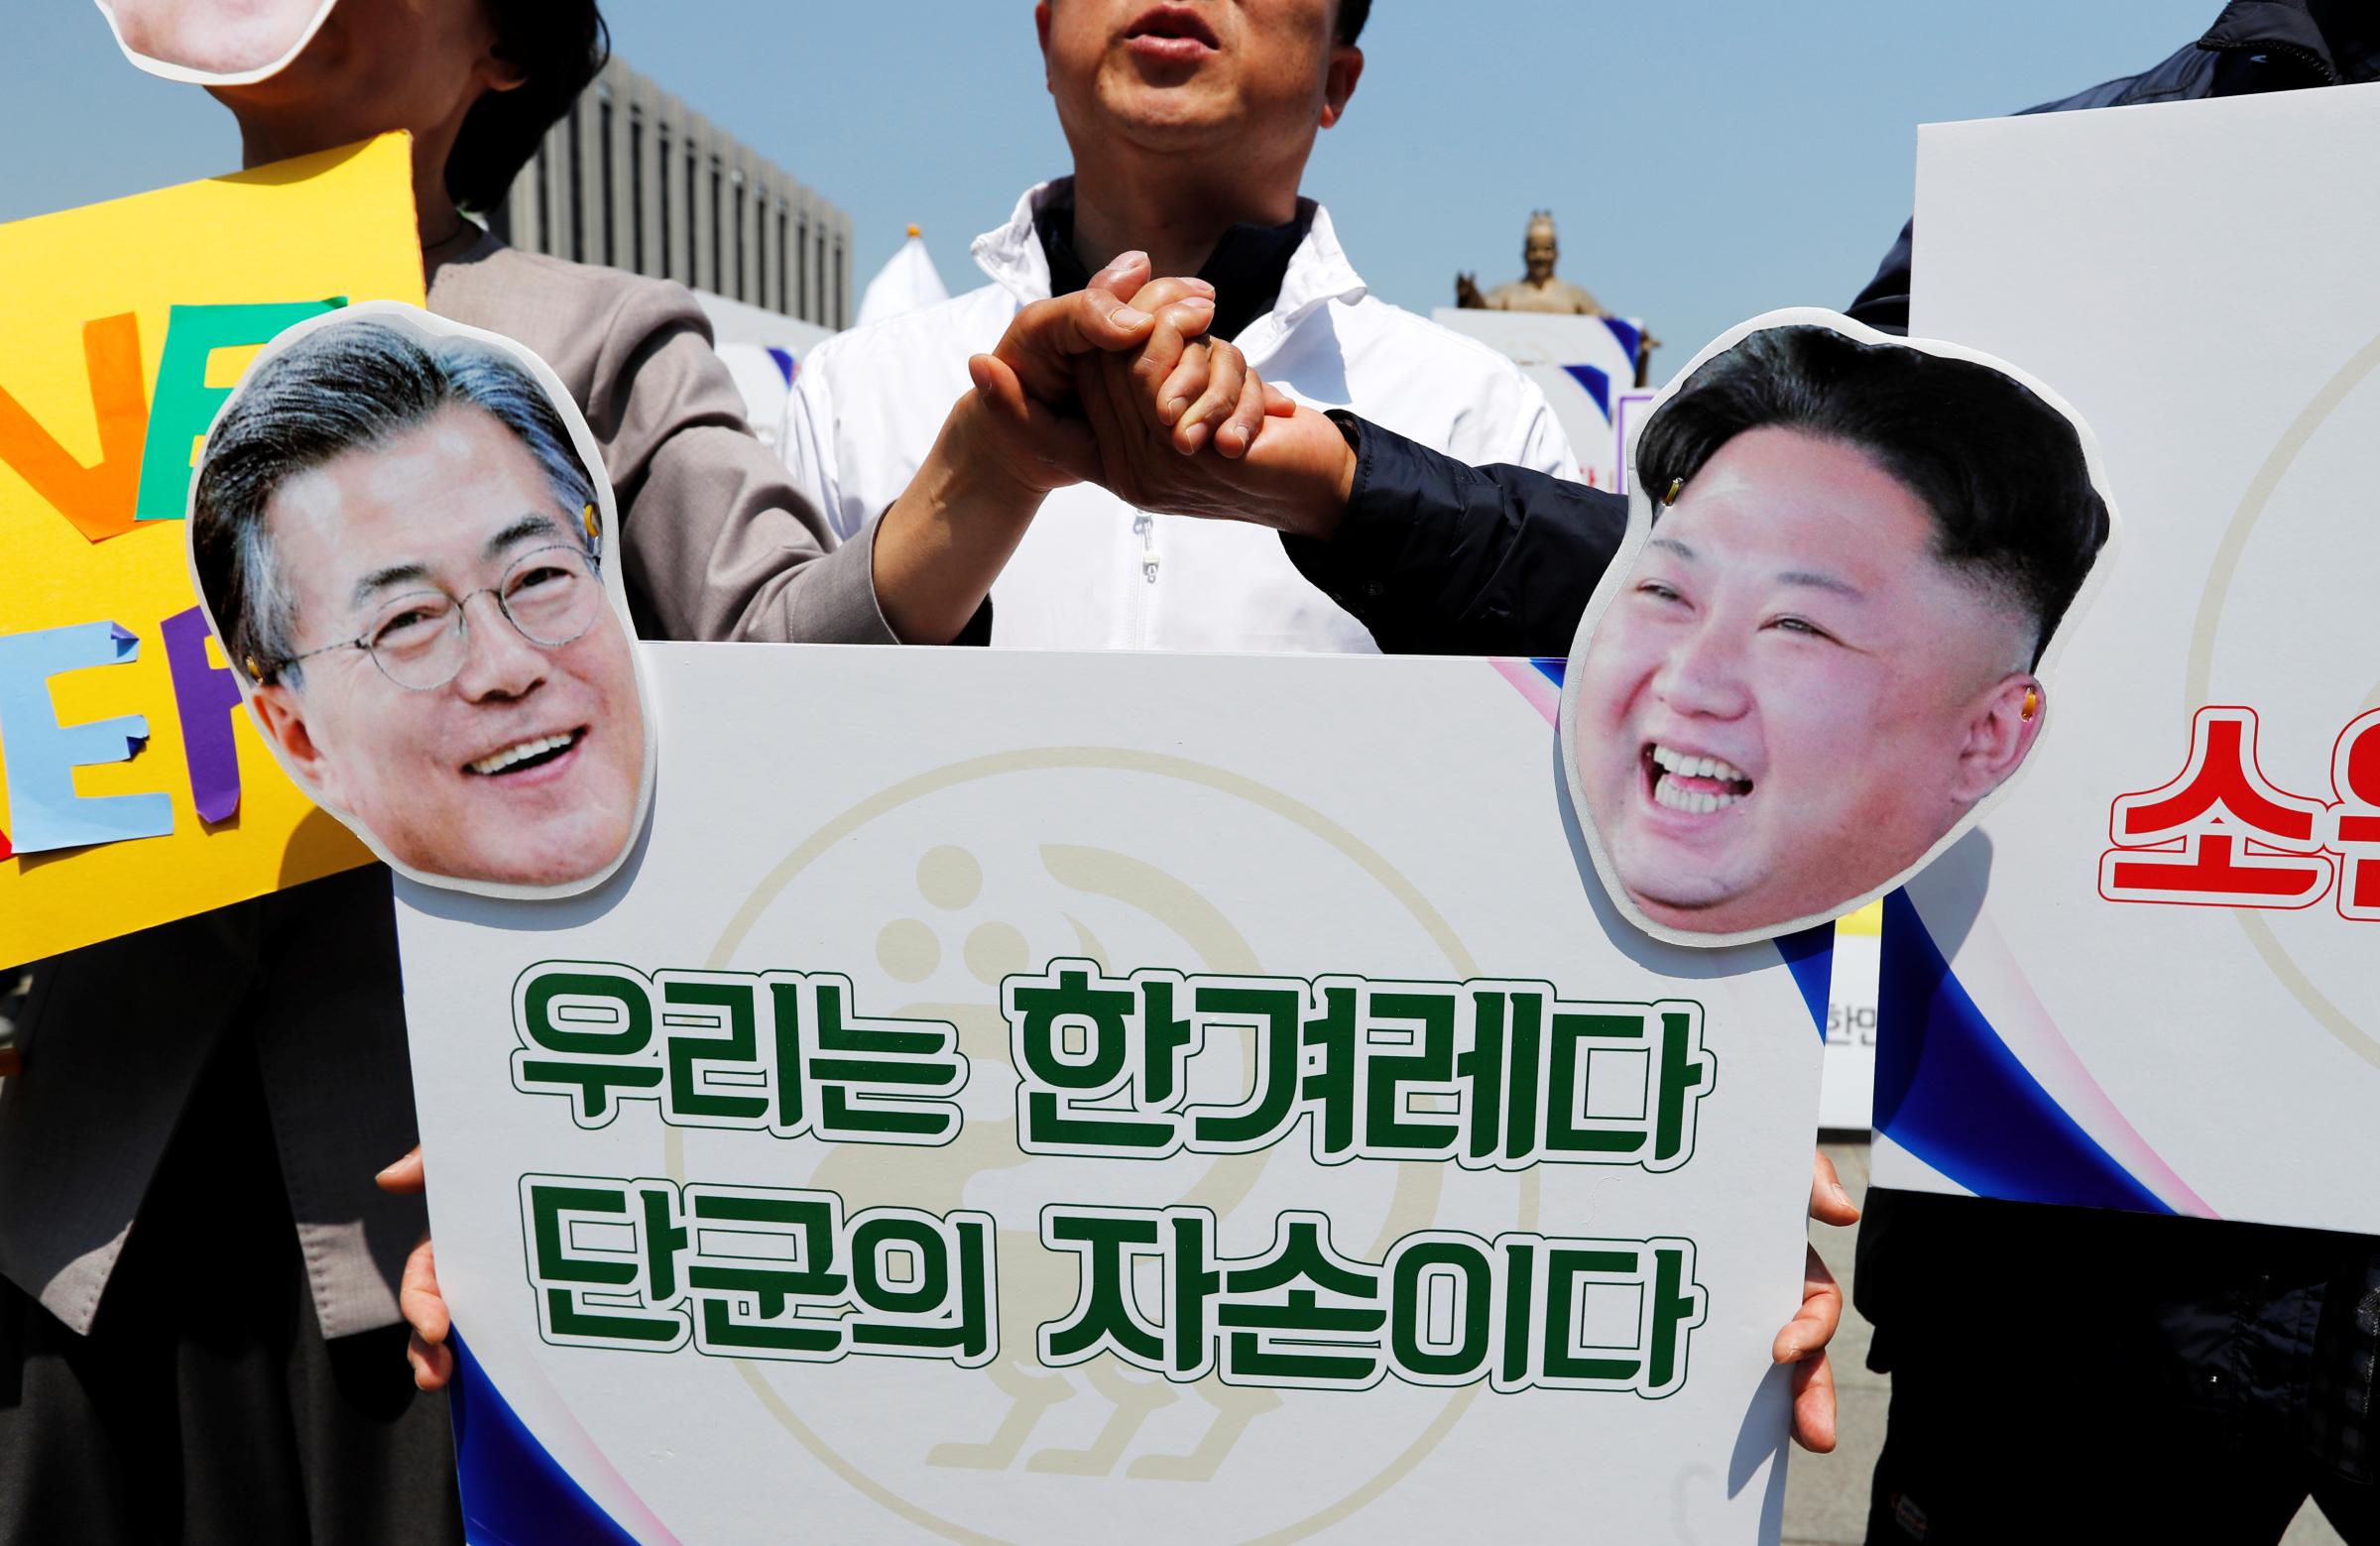 People hold hands behind a sign with cutouts of South Korea's President Moon Jae-in and North Korea's leader Kim Jong Un during a pro-unification rally ahead of the upcoming summit between North and South Korea in Seoul